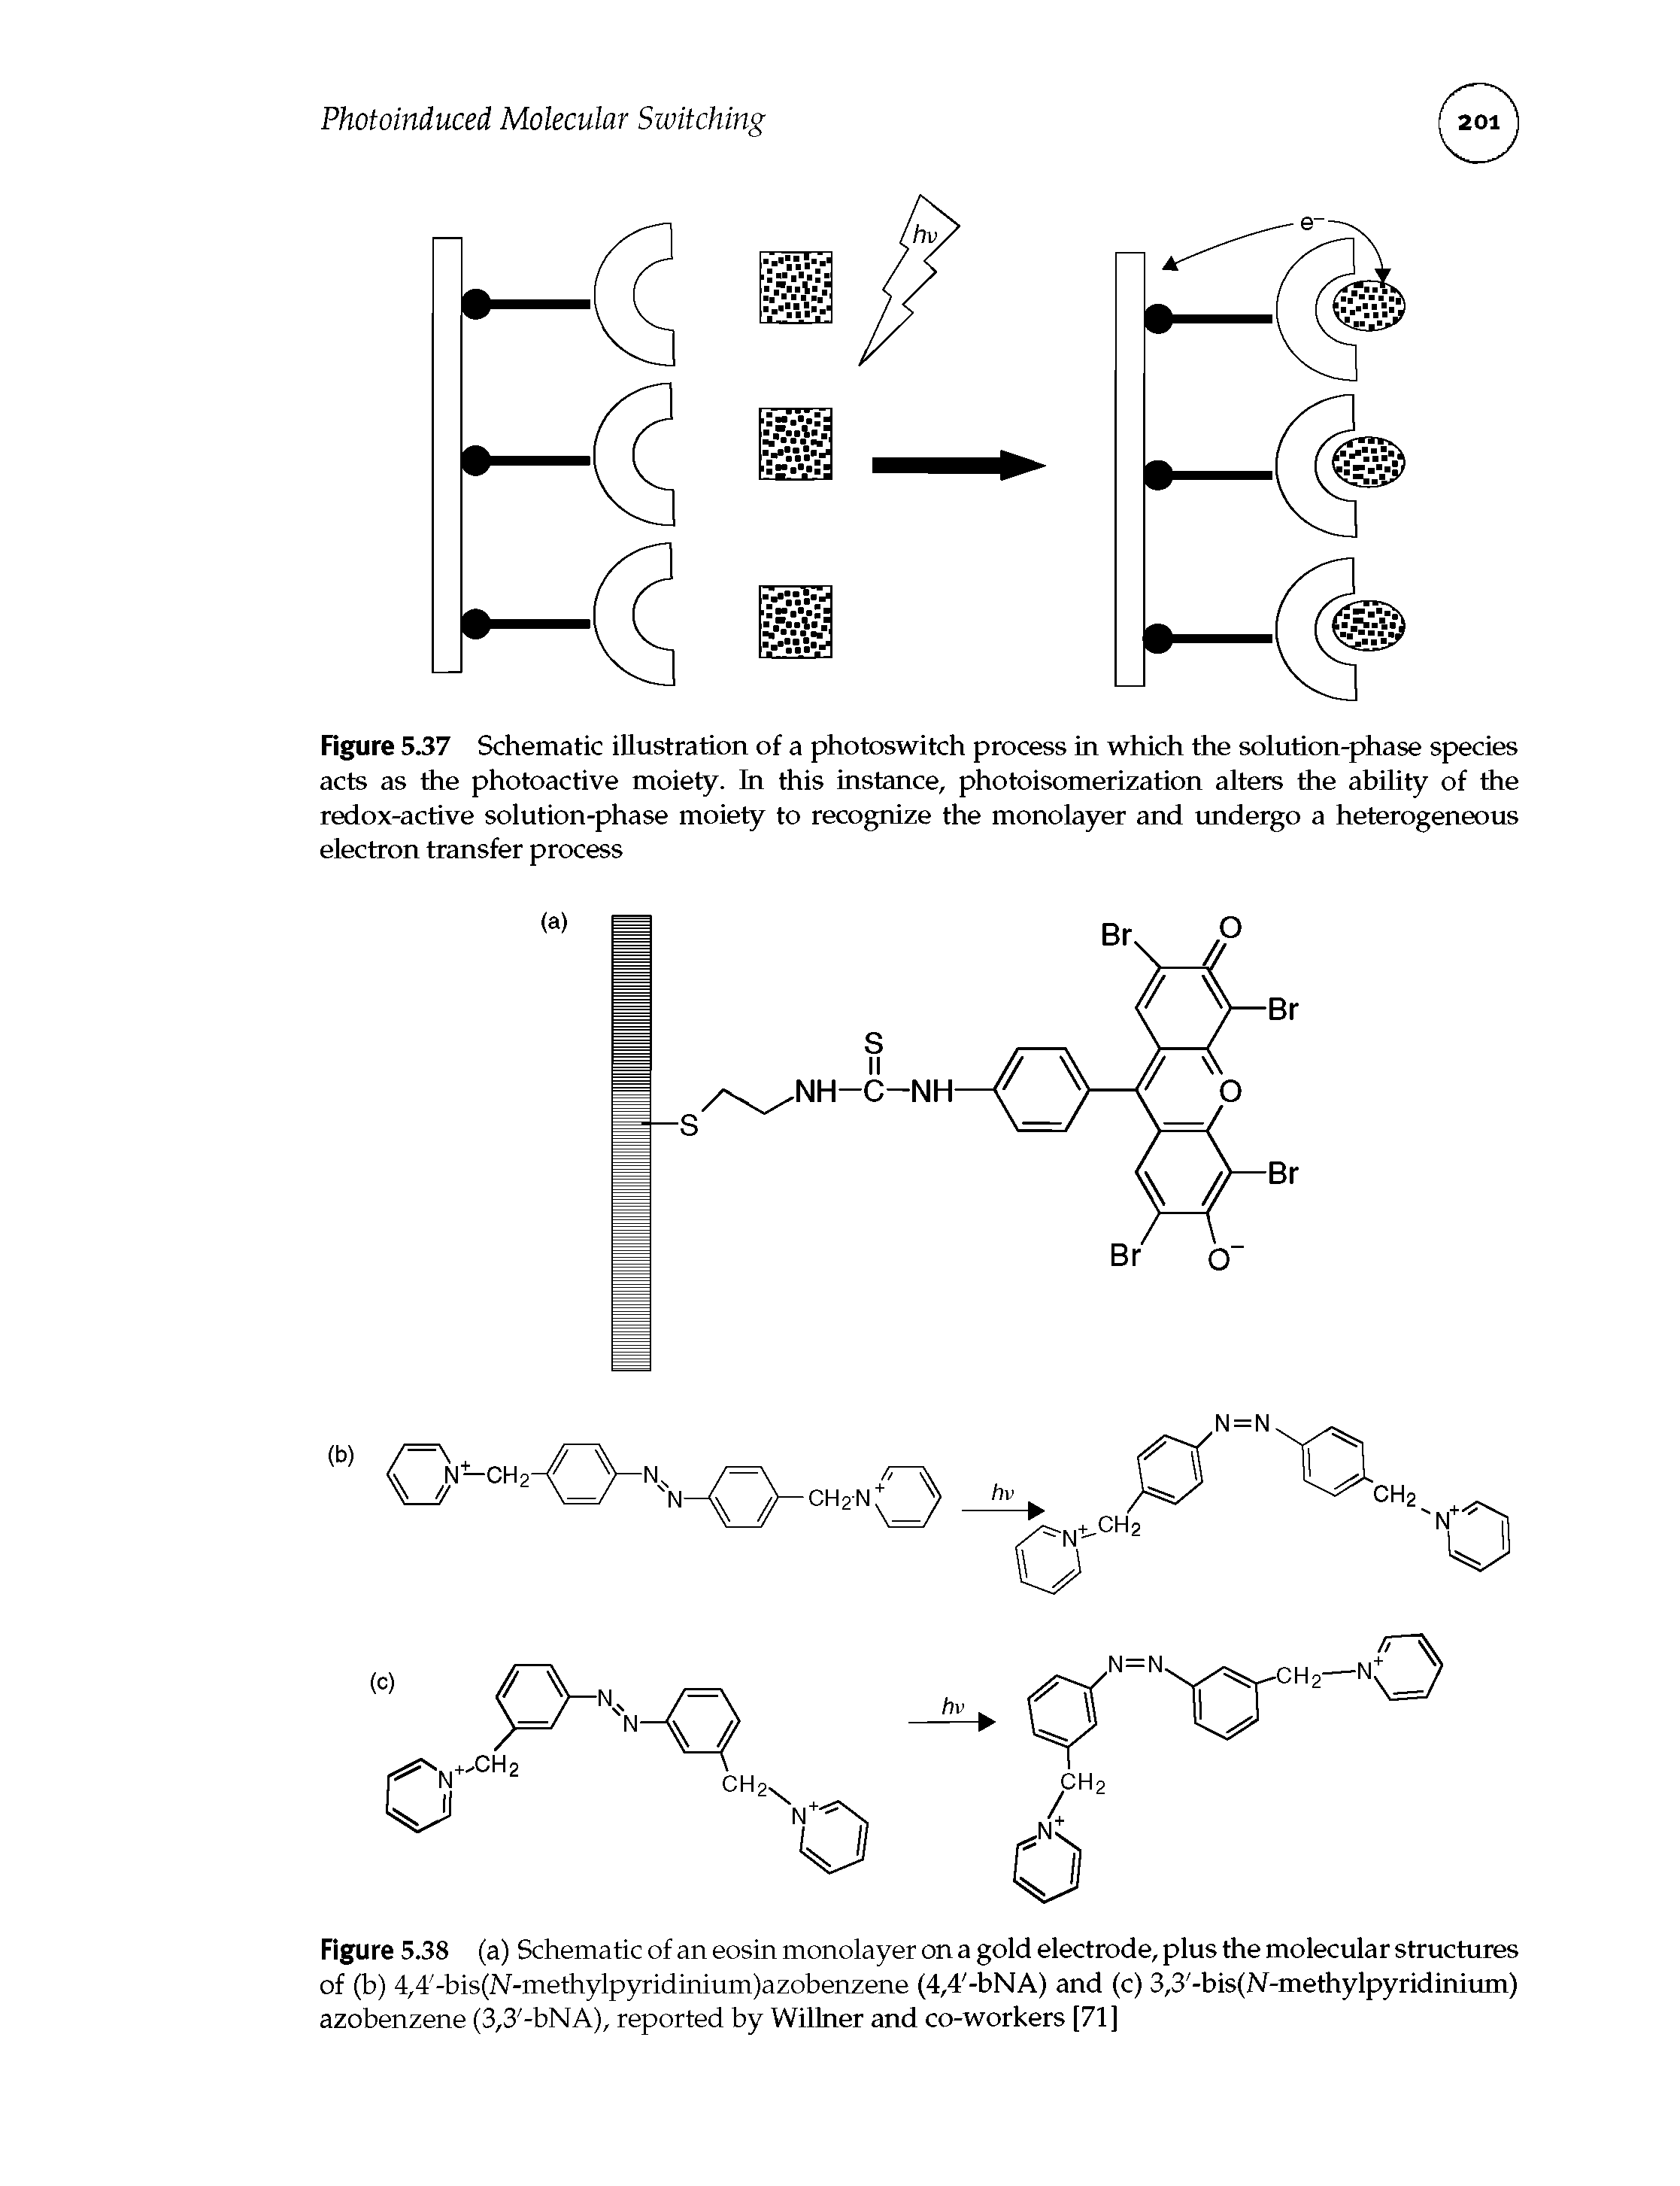 Figure 5.37 Schematic illustration of a photoswitch process in which the solution-phase species acts as the photoactive moiety. In this instance, photoisomerization alters the ability of the redox-active solution-phase moiety to recognize the monolayer and undergo a heterogeneous electron transfer process...